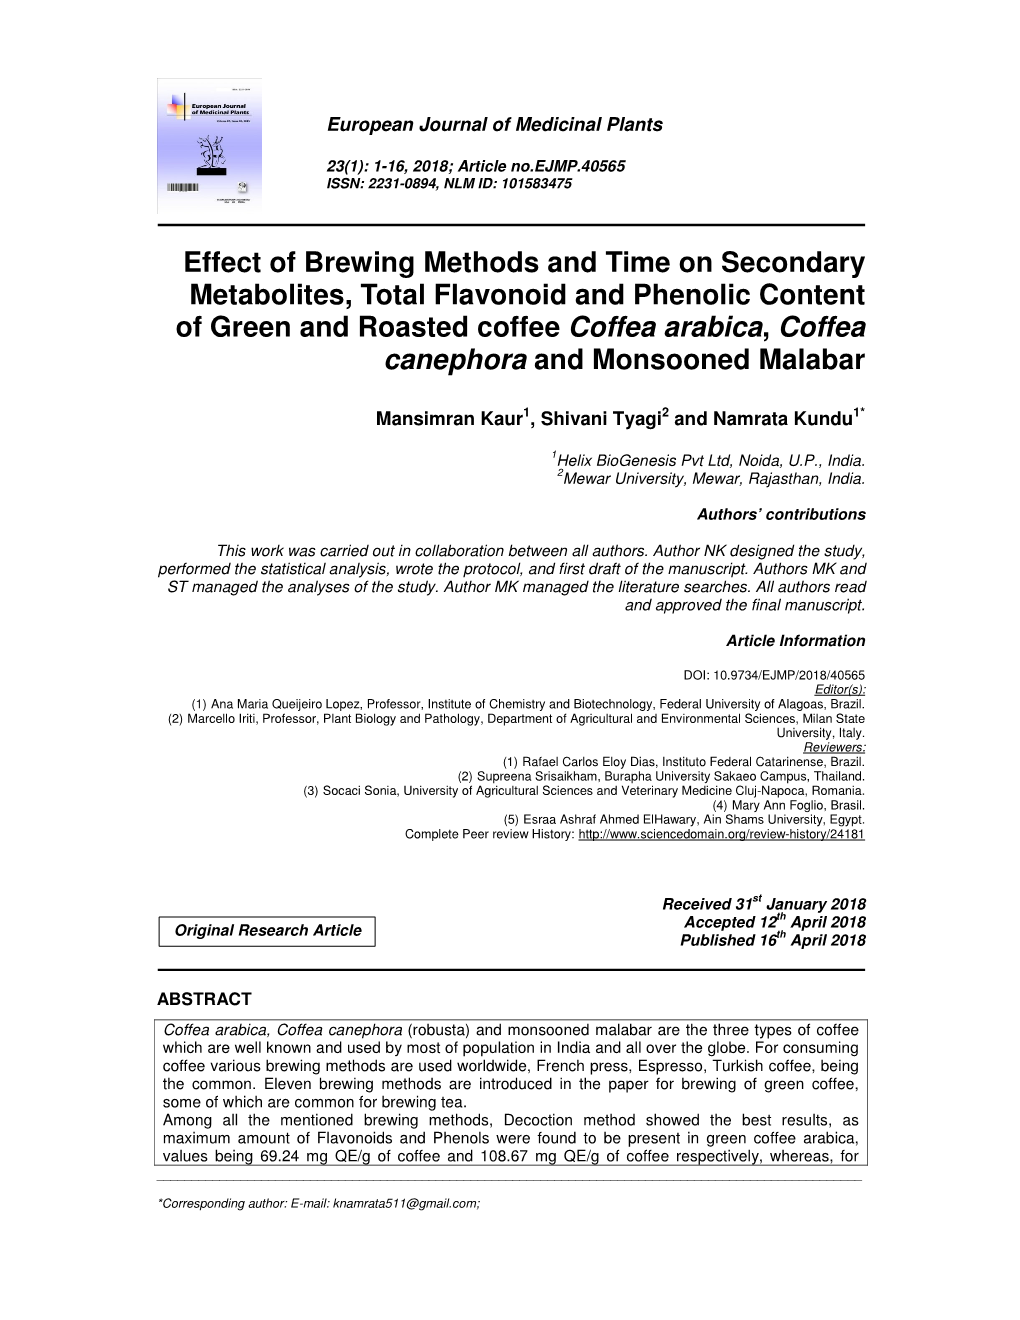 Effect of Brewing Methods and Time on Secondary Metabolites, Total